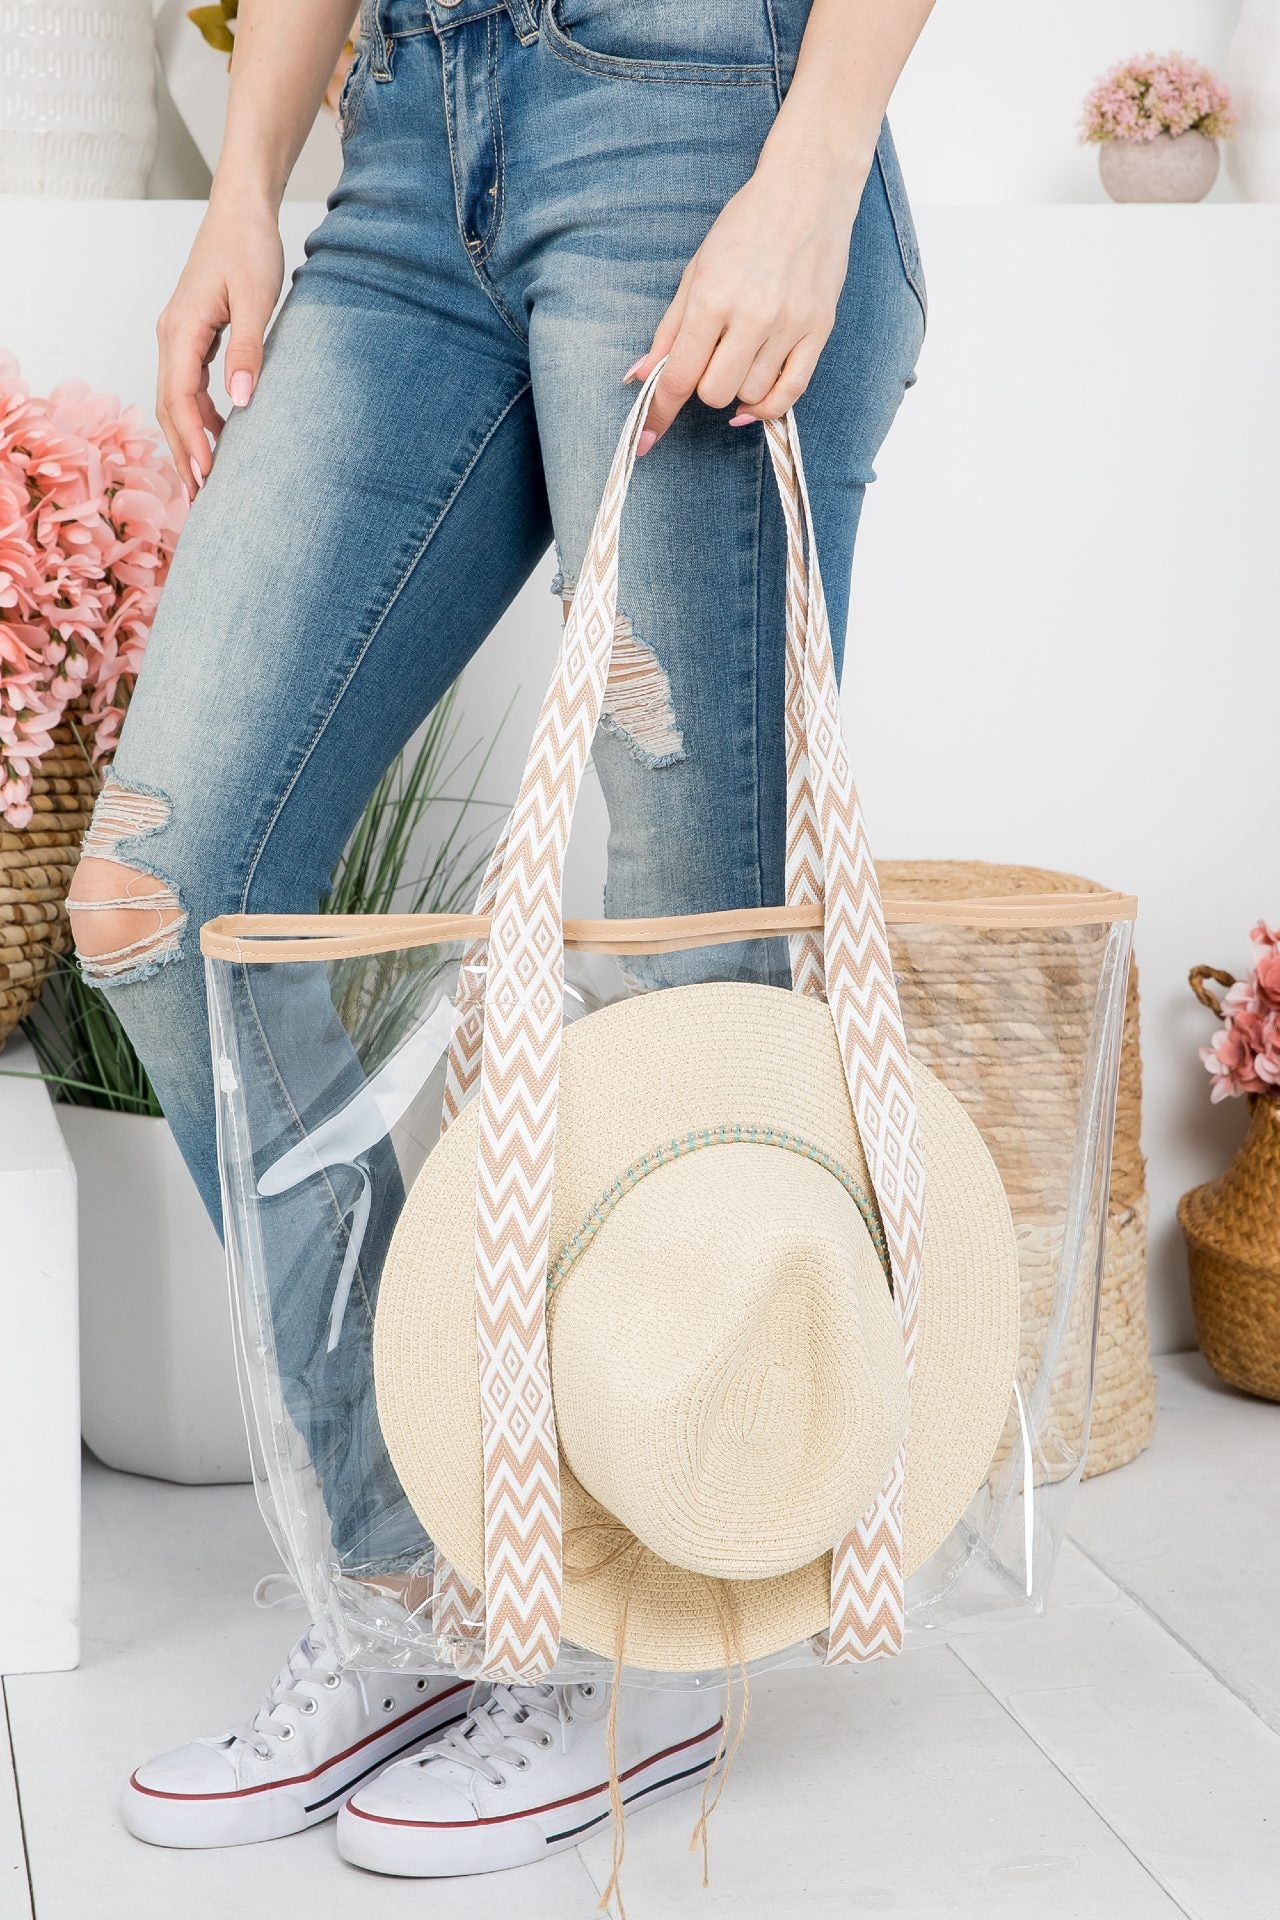 MB0193 Hat Carrying Clear Tote Bag